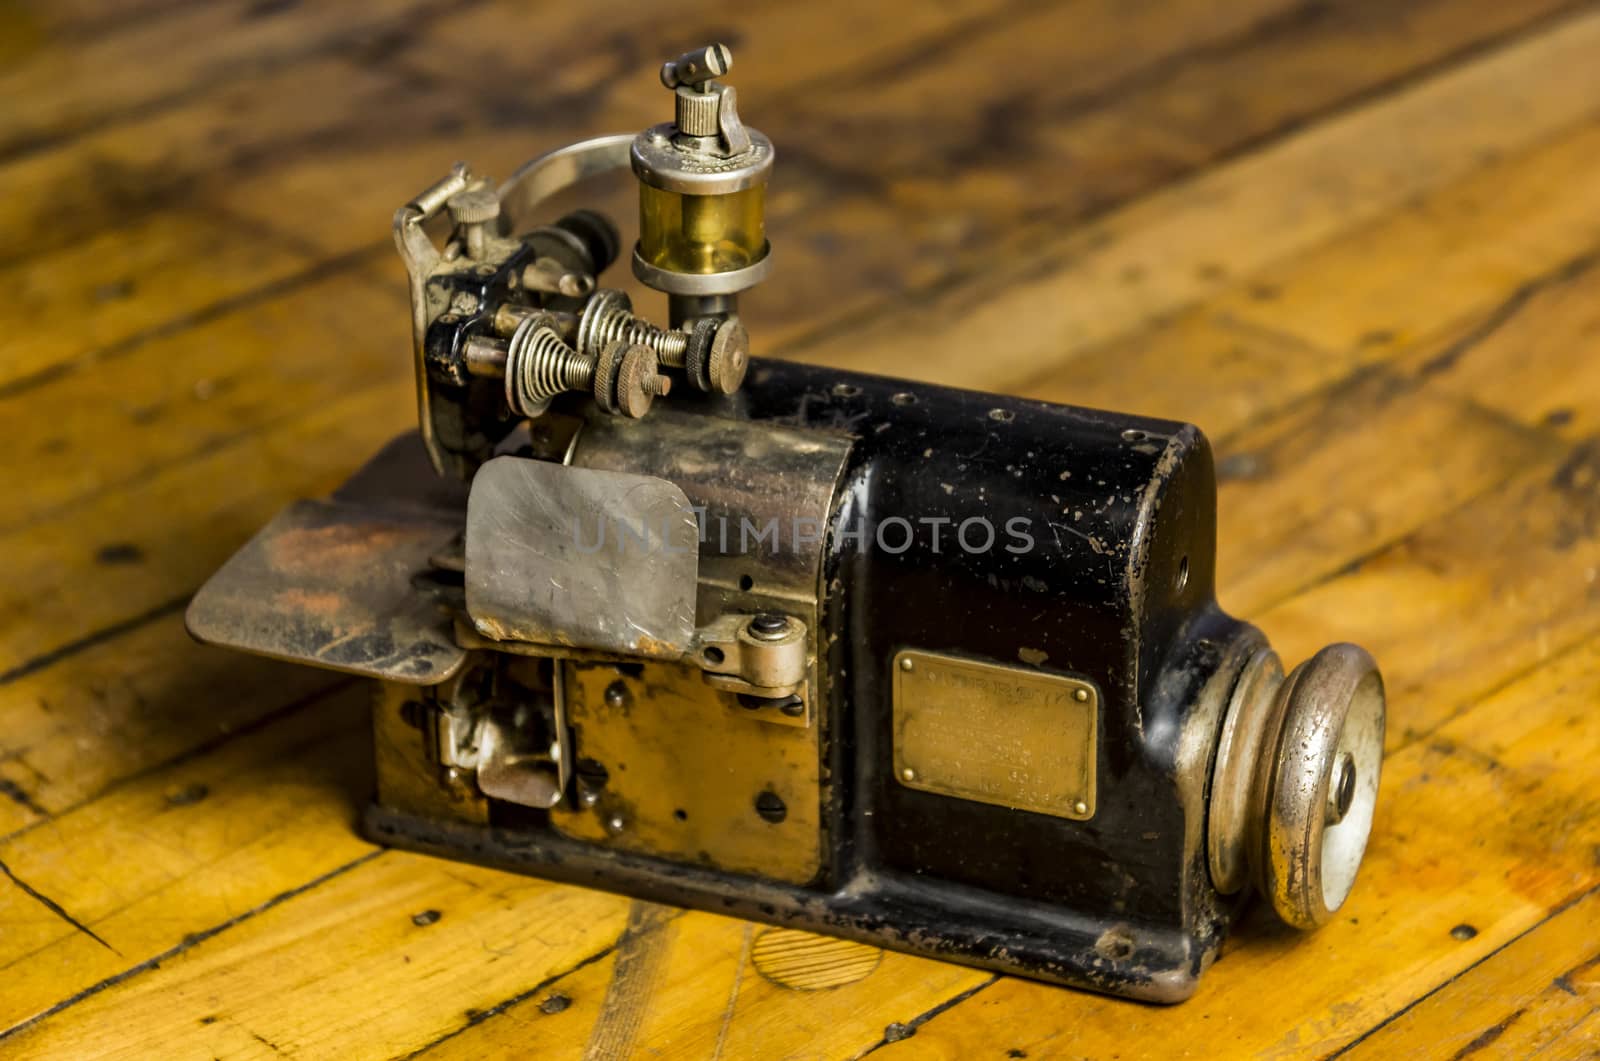 Vintage industrial sewing machine isolated on wooden floor